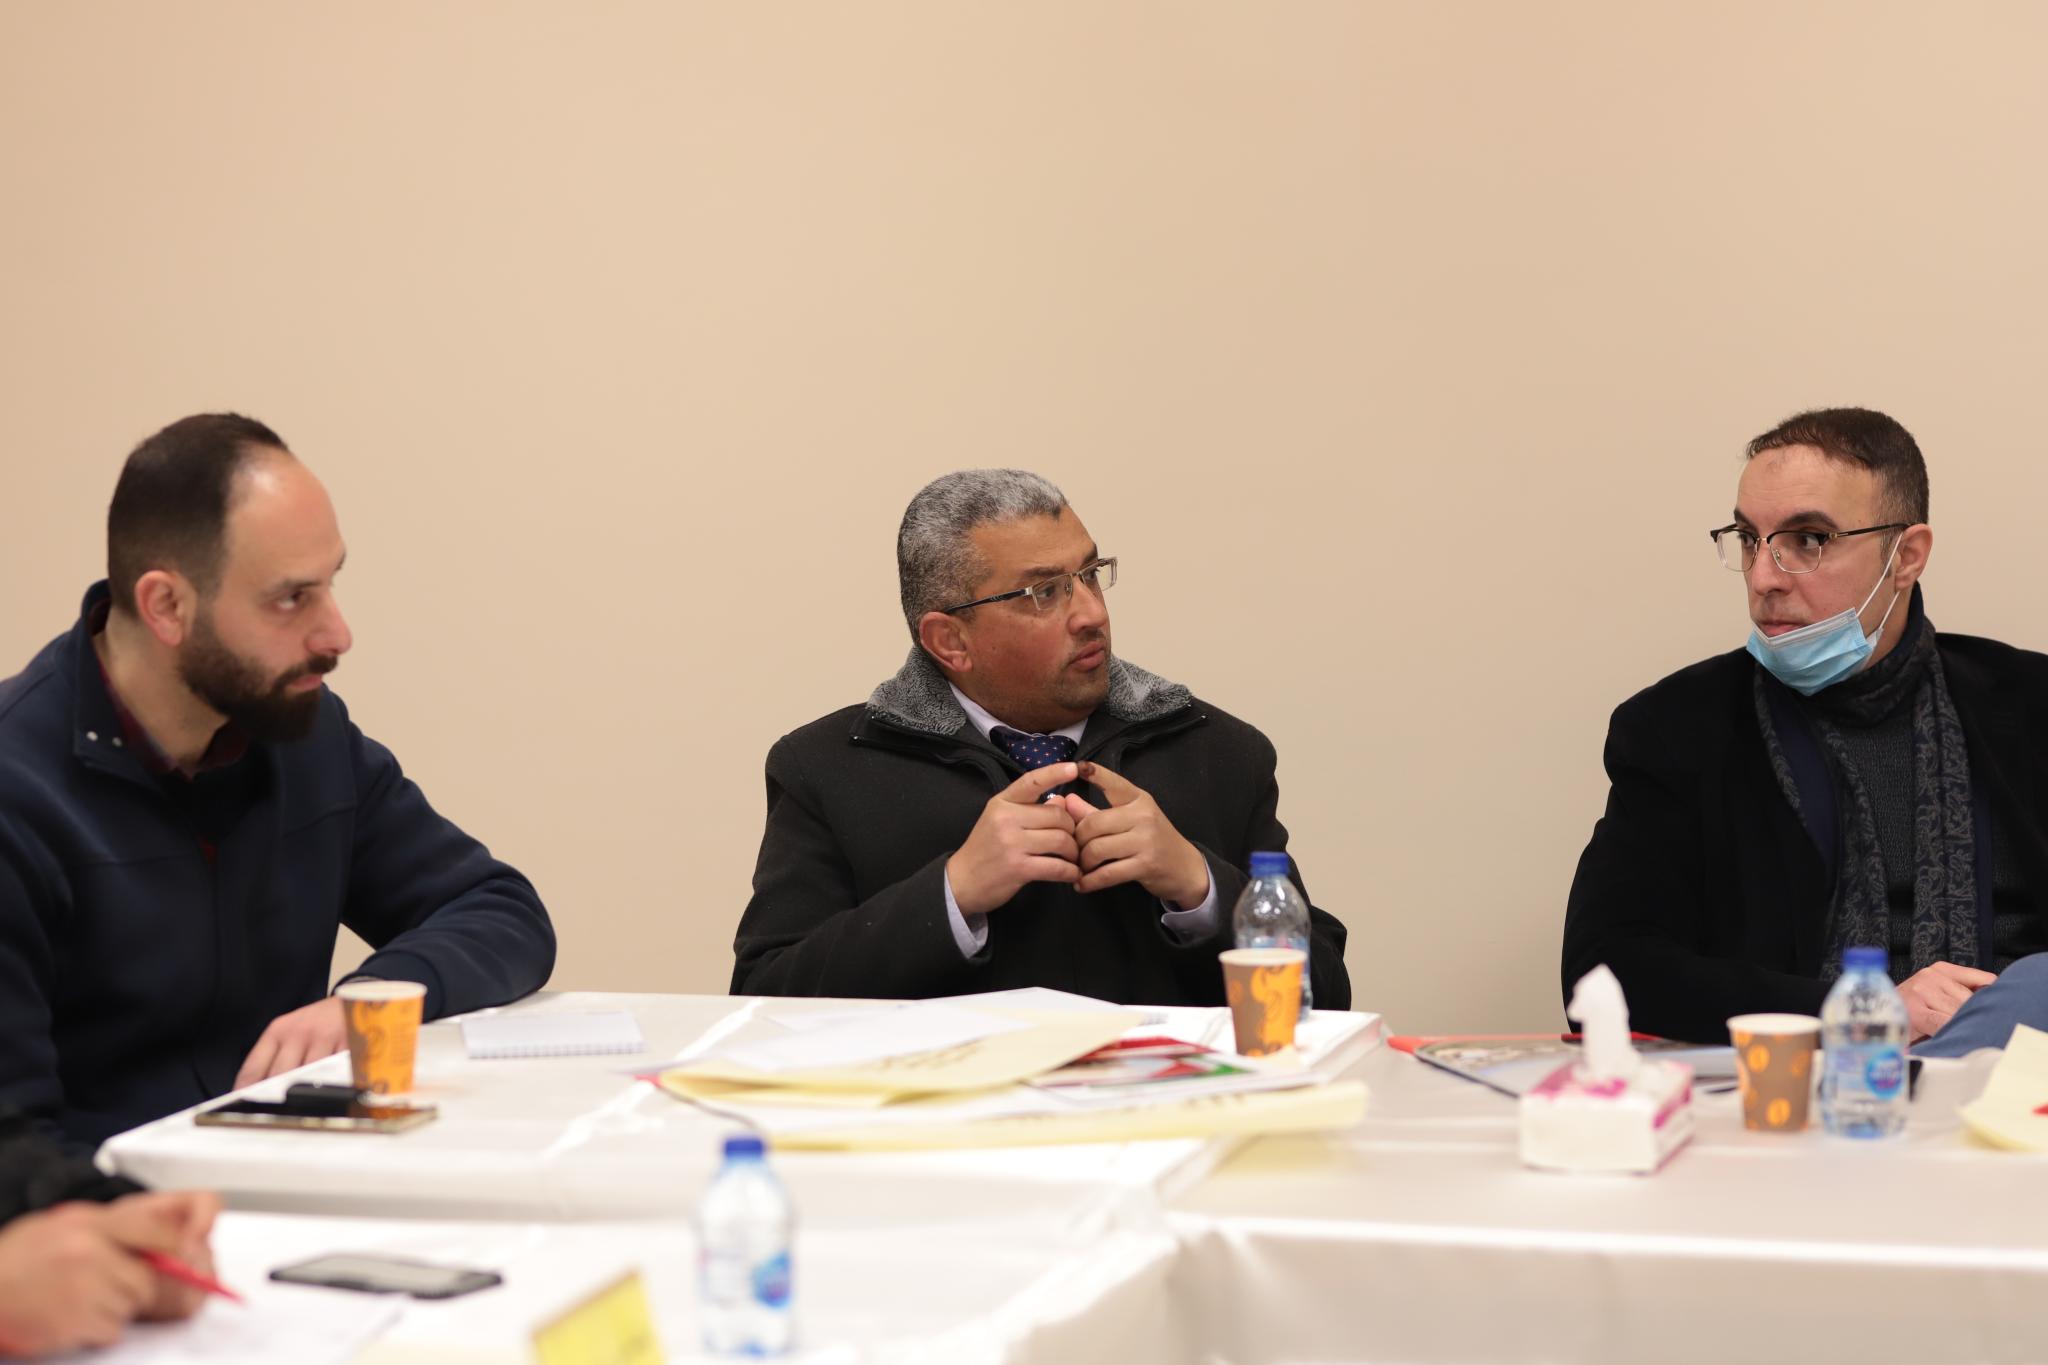 AAUP Hosts the Heads of the Languages Departments and the English Language Departments in the Palestinian Universities